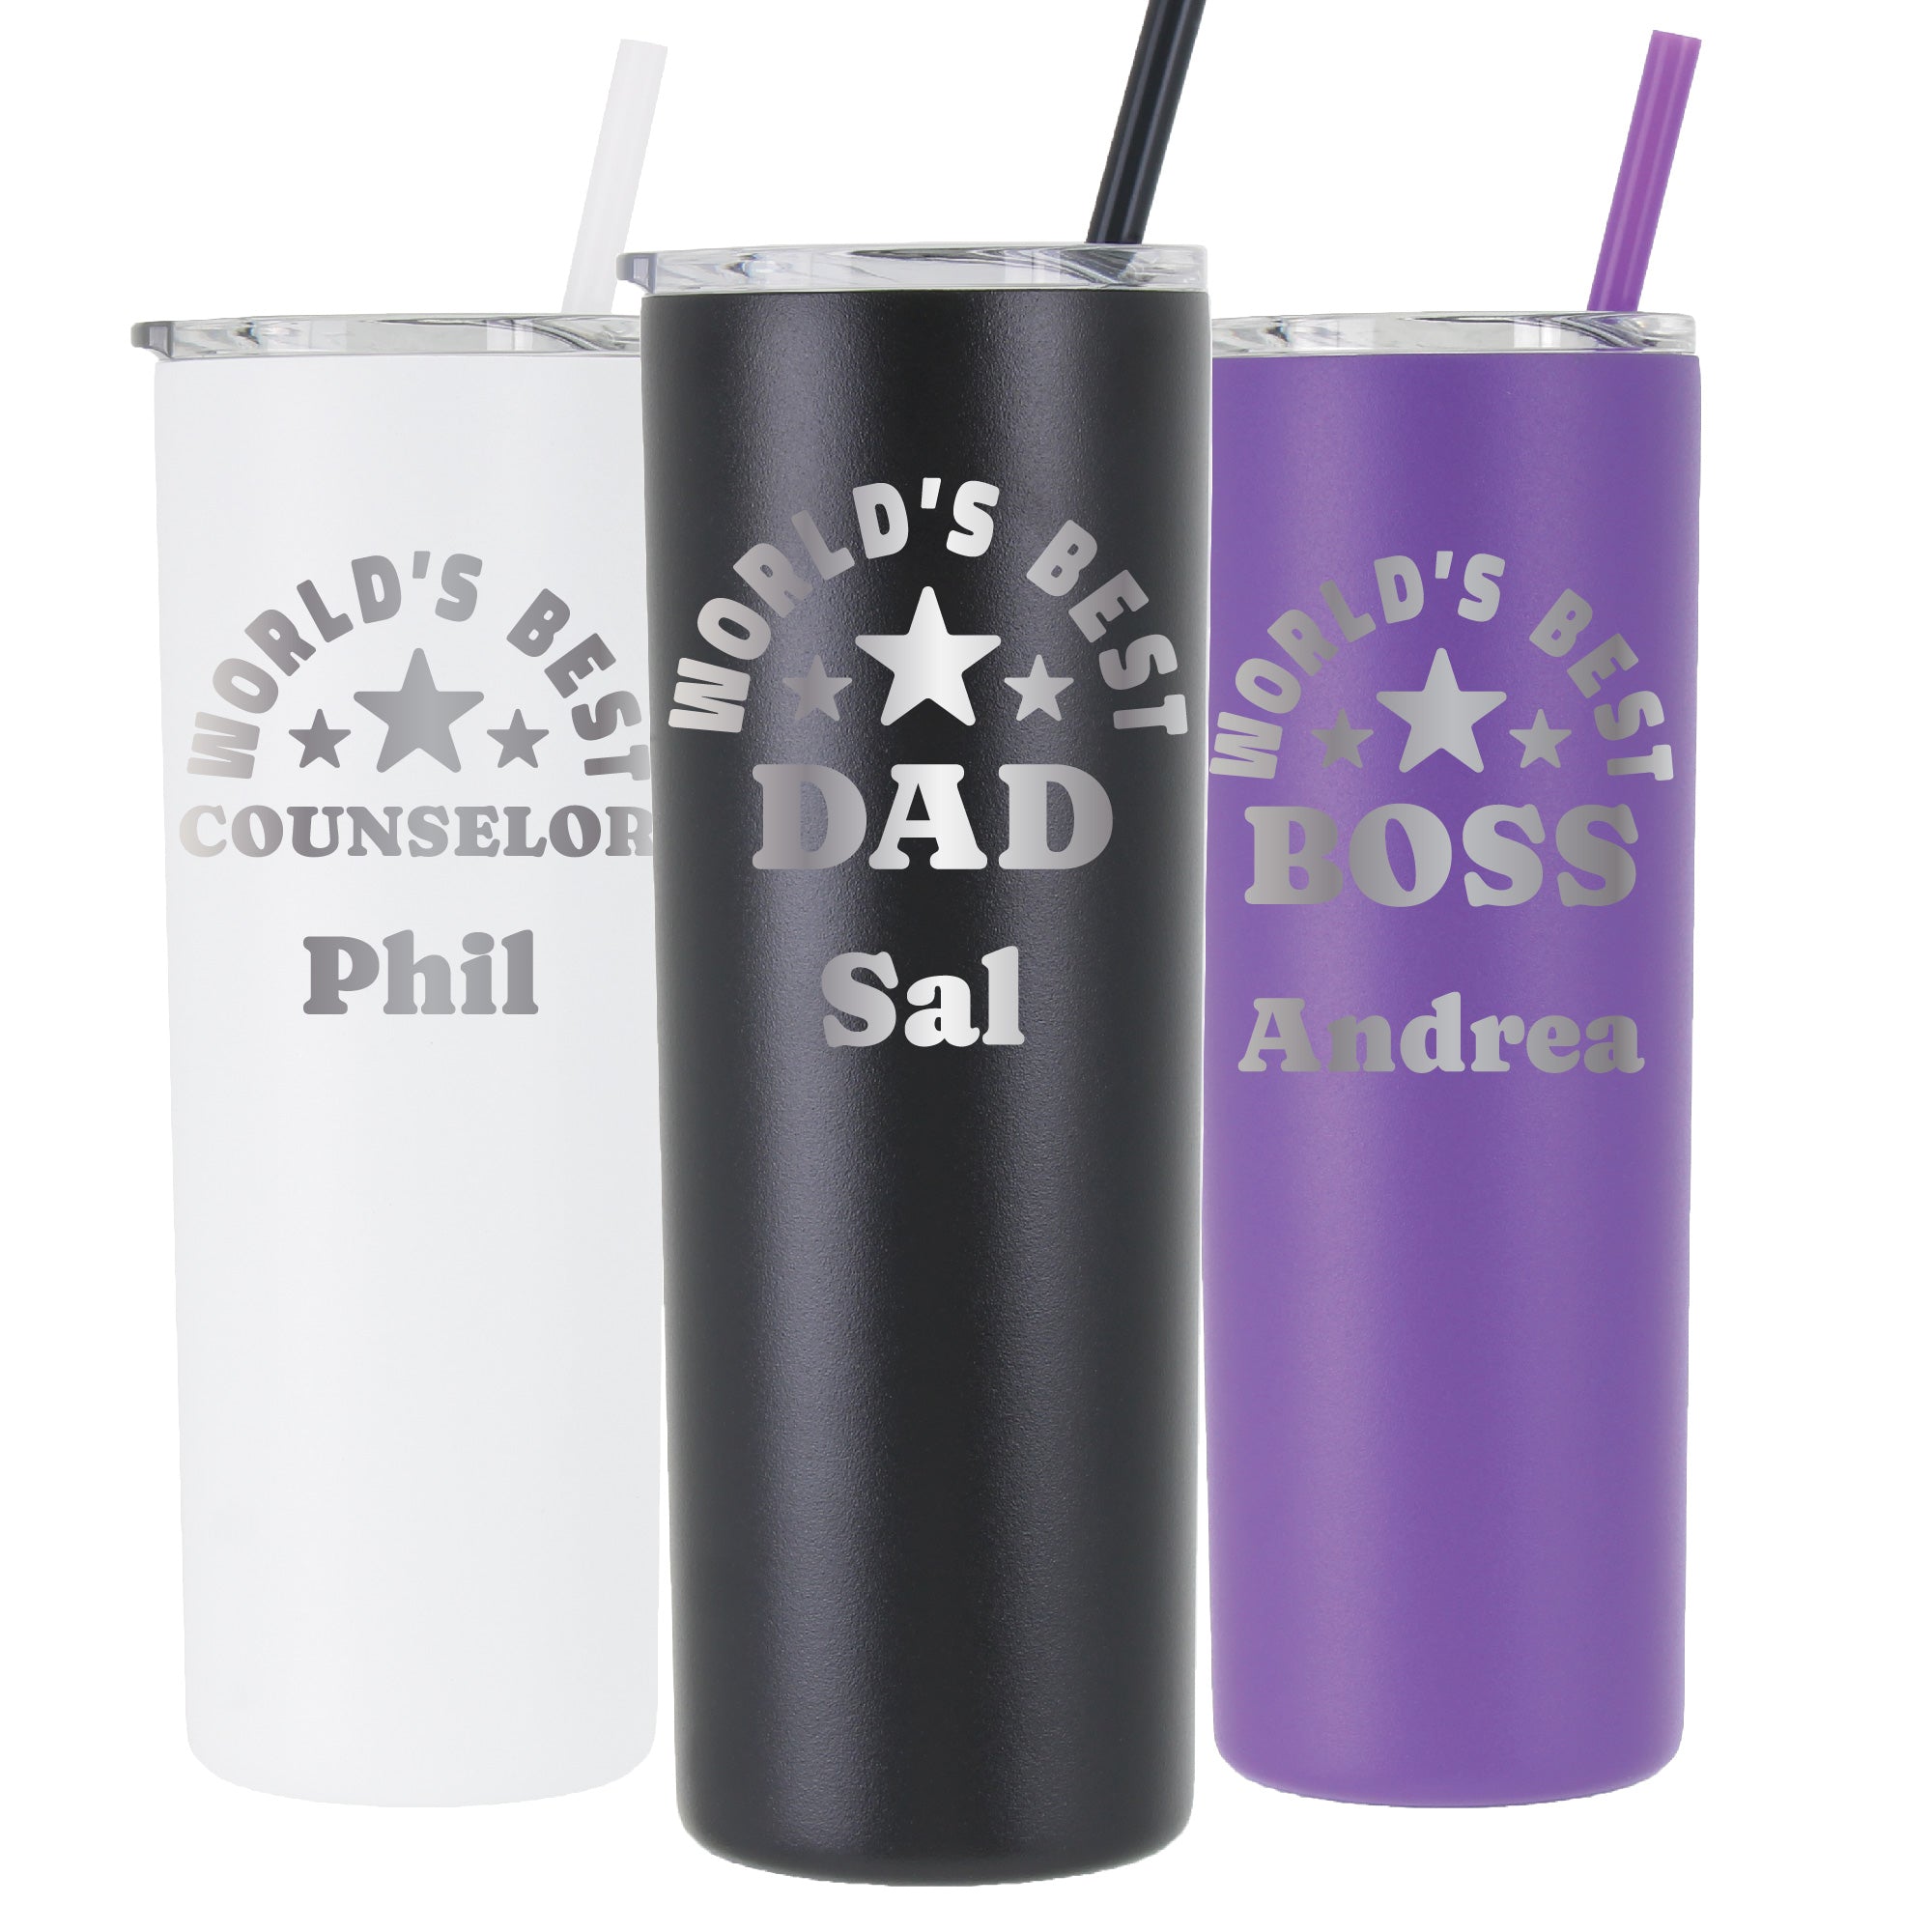 Engraved Personalized Weightlifting Tumbler by Lifetime Creations